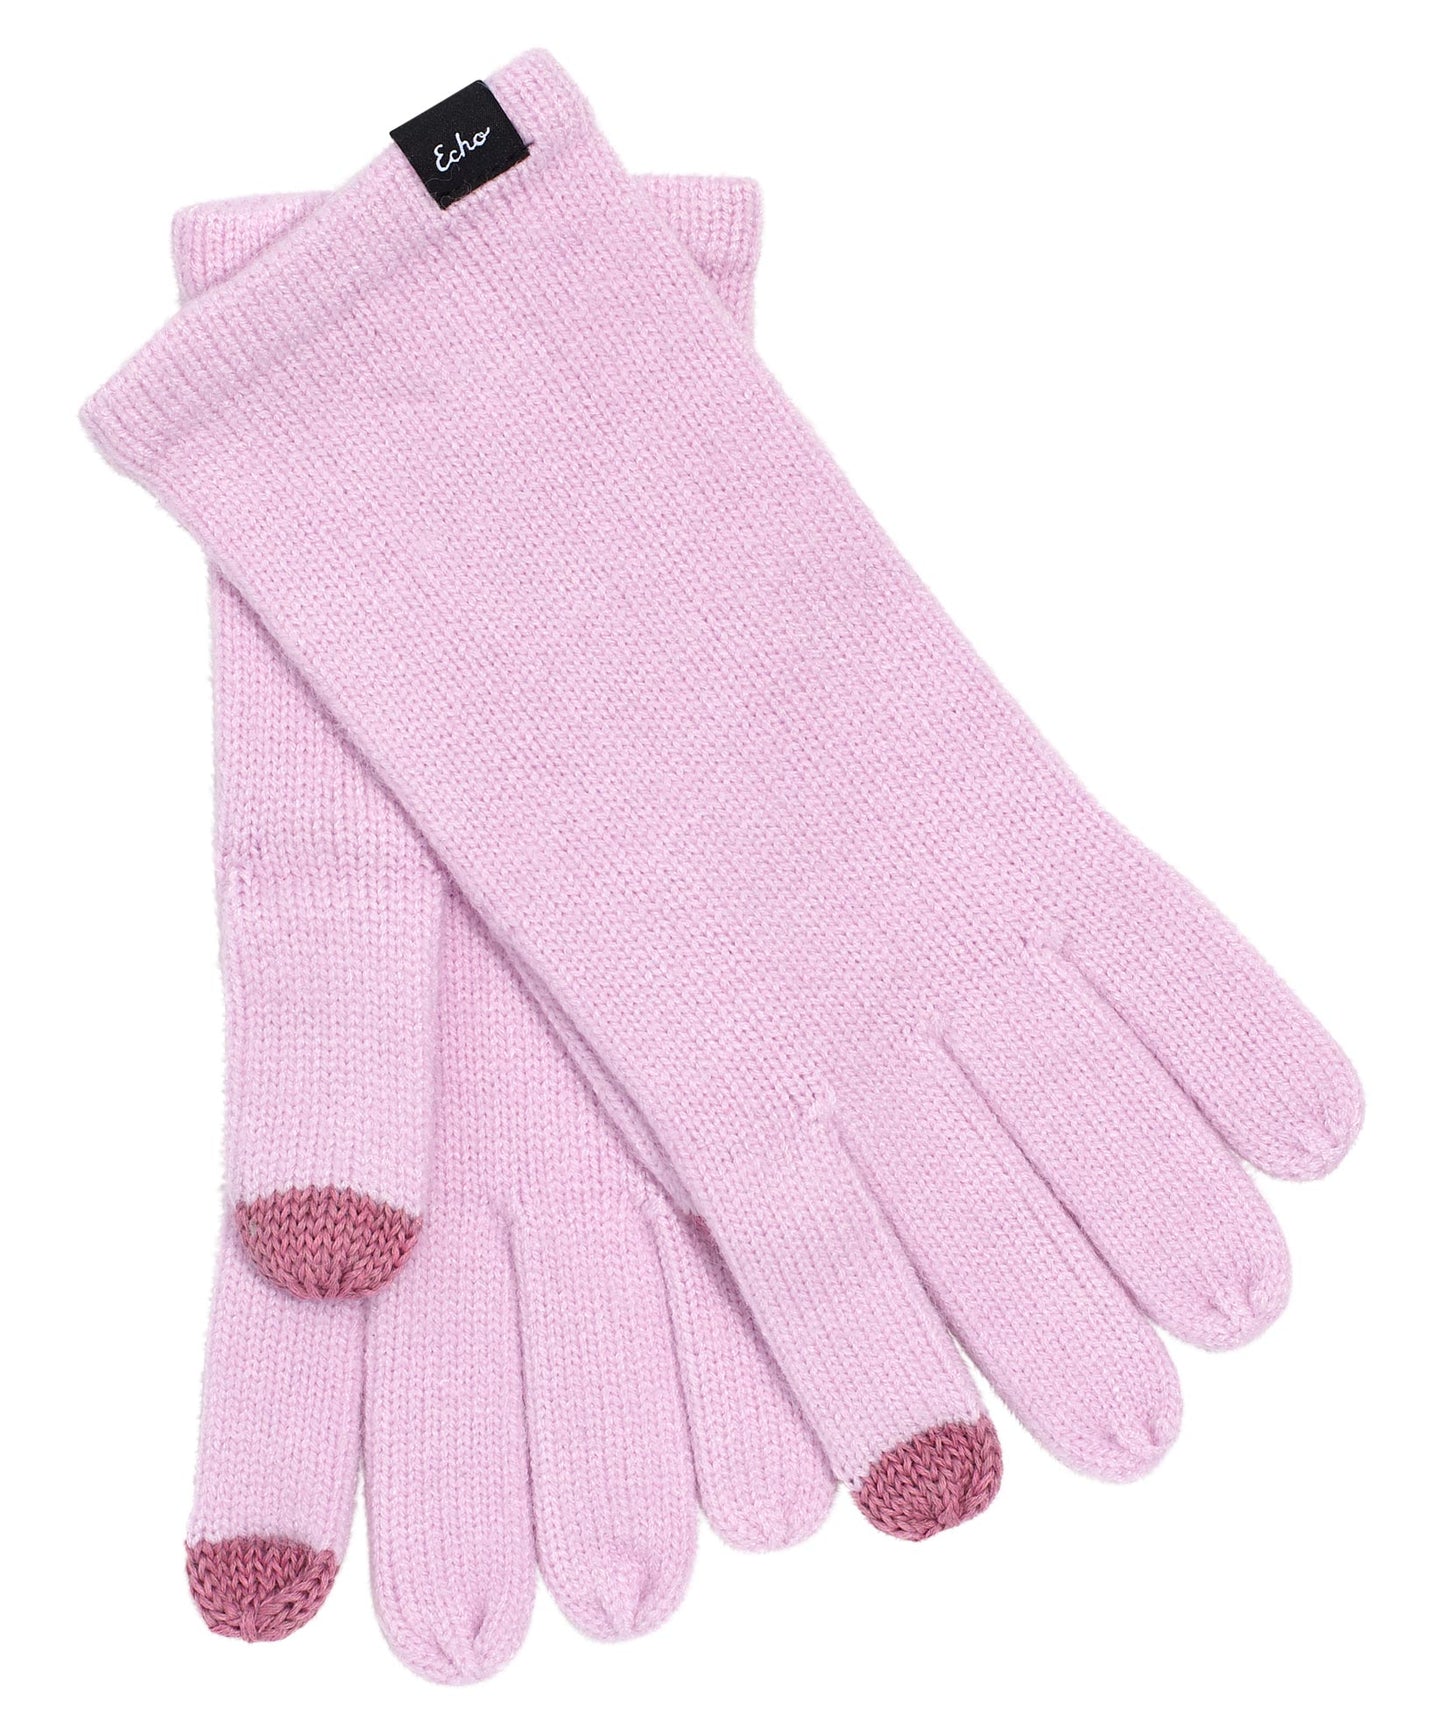 Echo Knit Touch Glove in color Pale Lilac